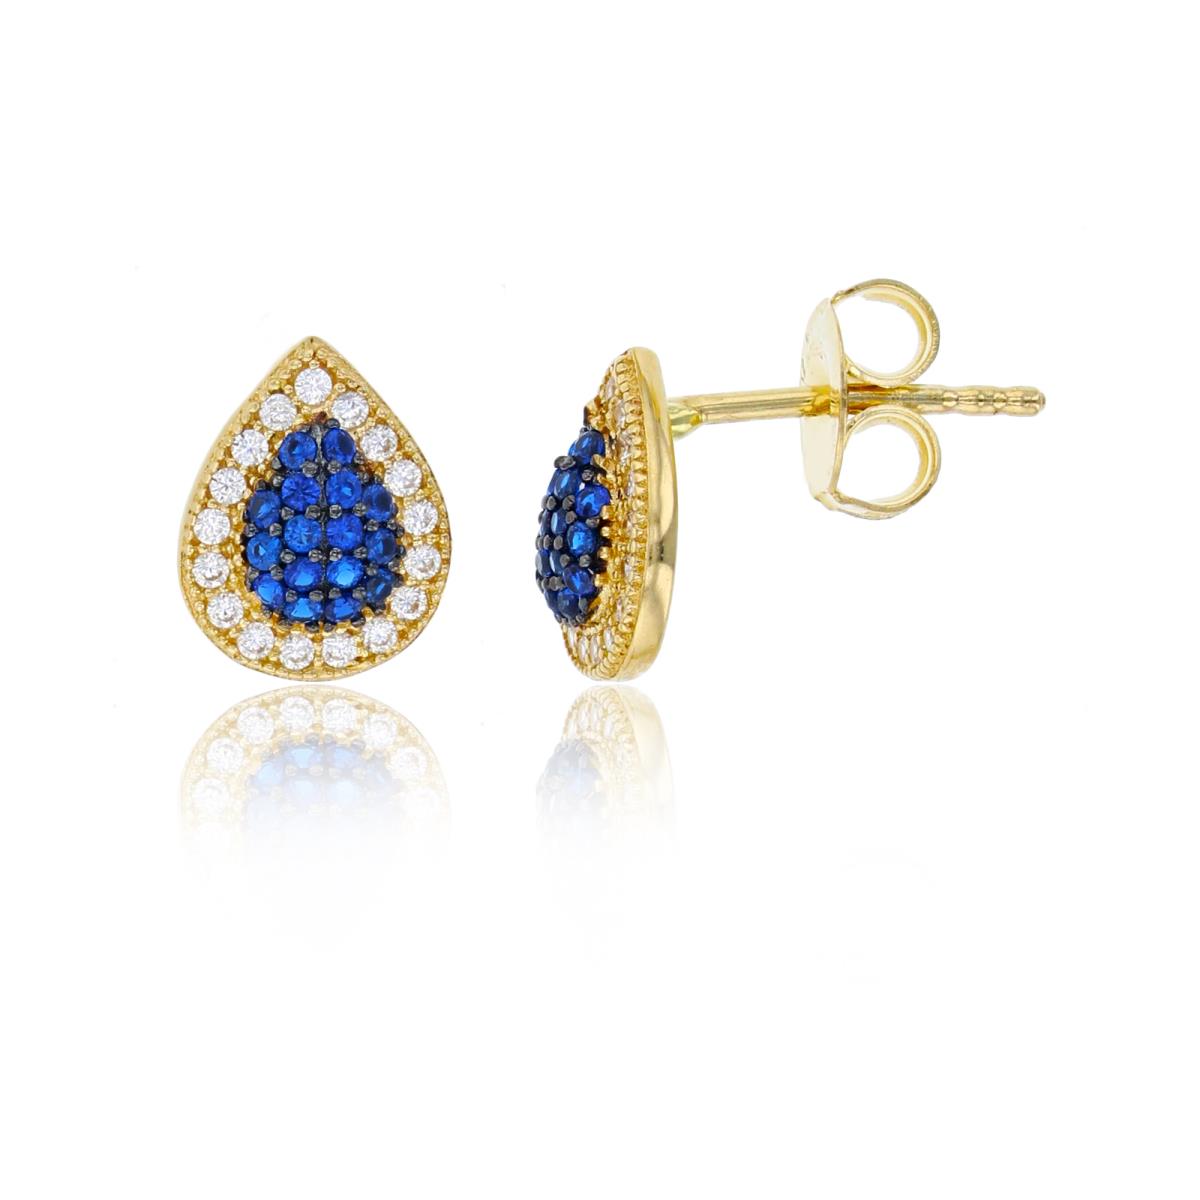 14K Yellow Gold 9x8mm Micropave Sapphire & White CZ Domed Pear-Shaped Stud Earring